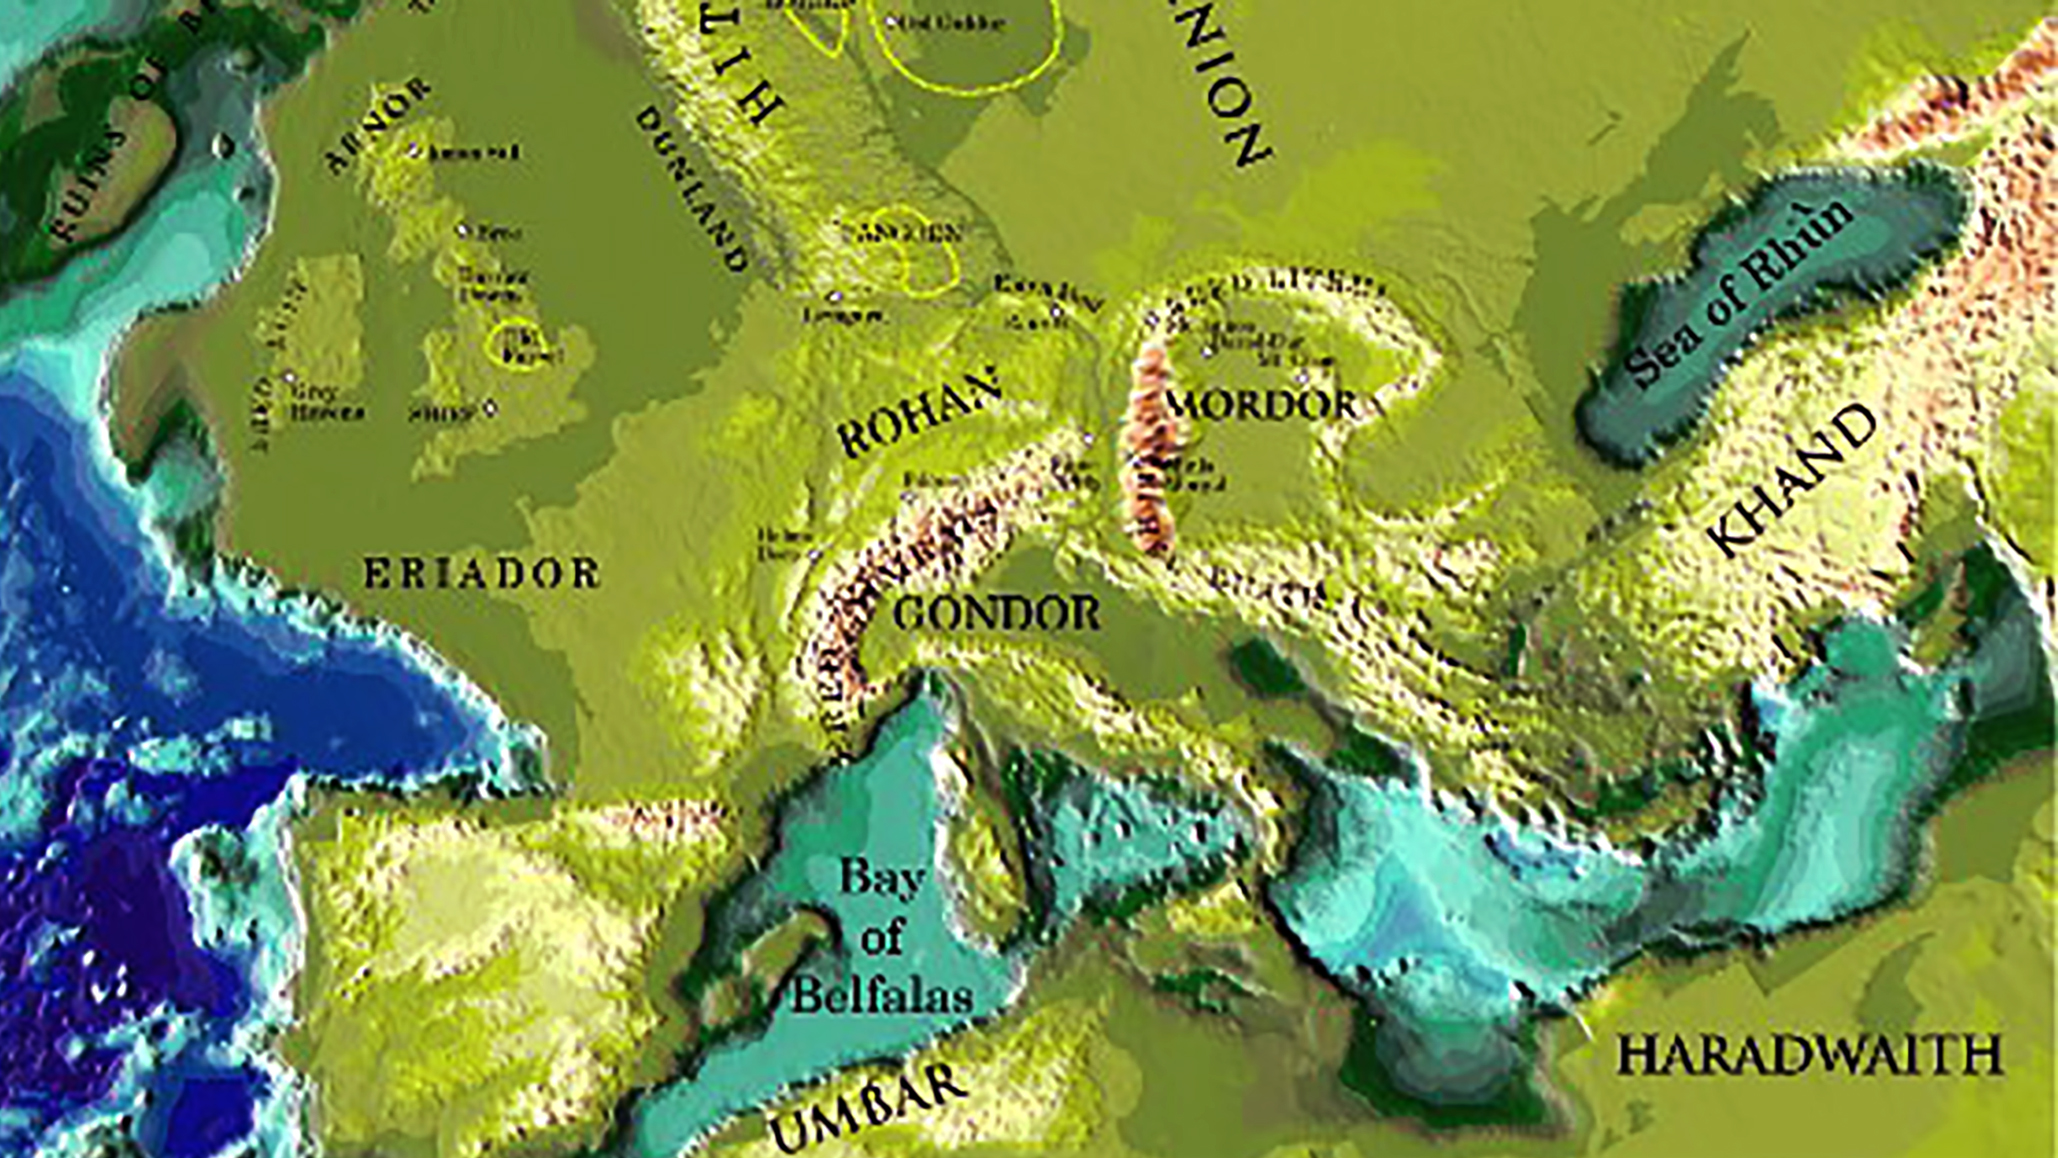 Lord of the Rings - Map of Middle Earth - Athena Posters